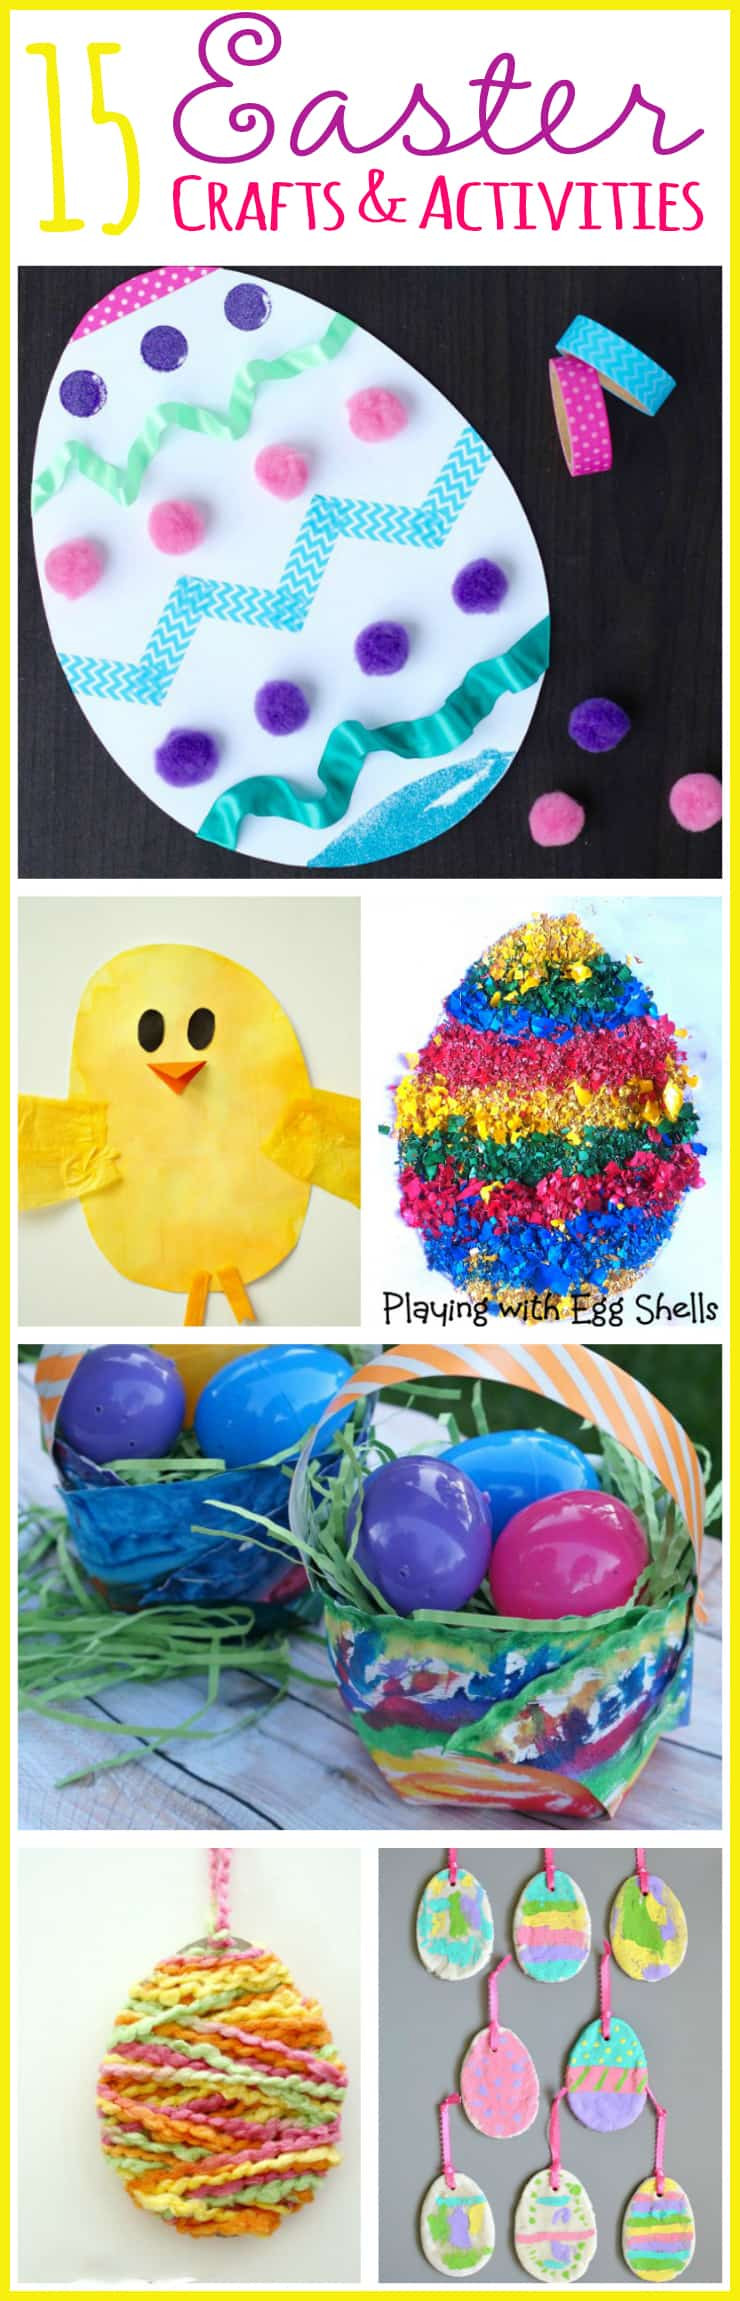 Kids Crafts For Easter
 15 Fun & Easy Easter Crafts & Activities 5 Minutes for Mom